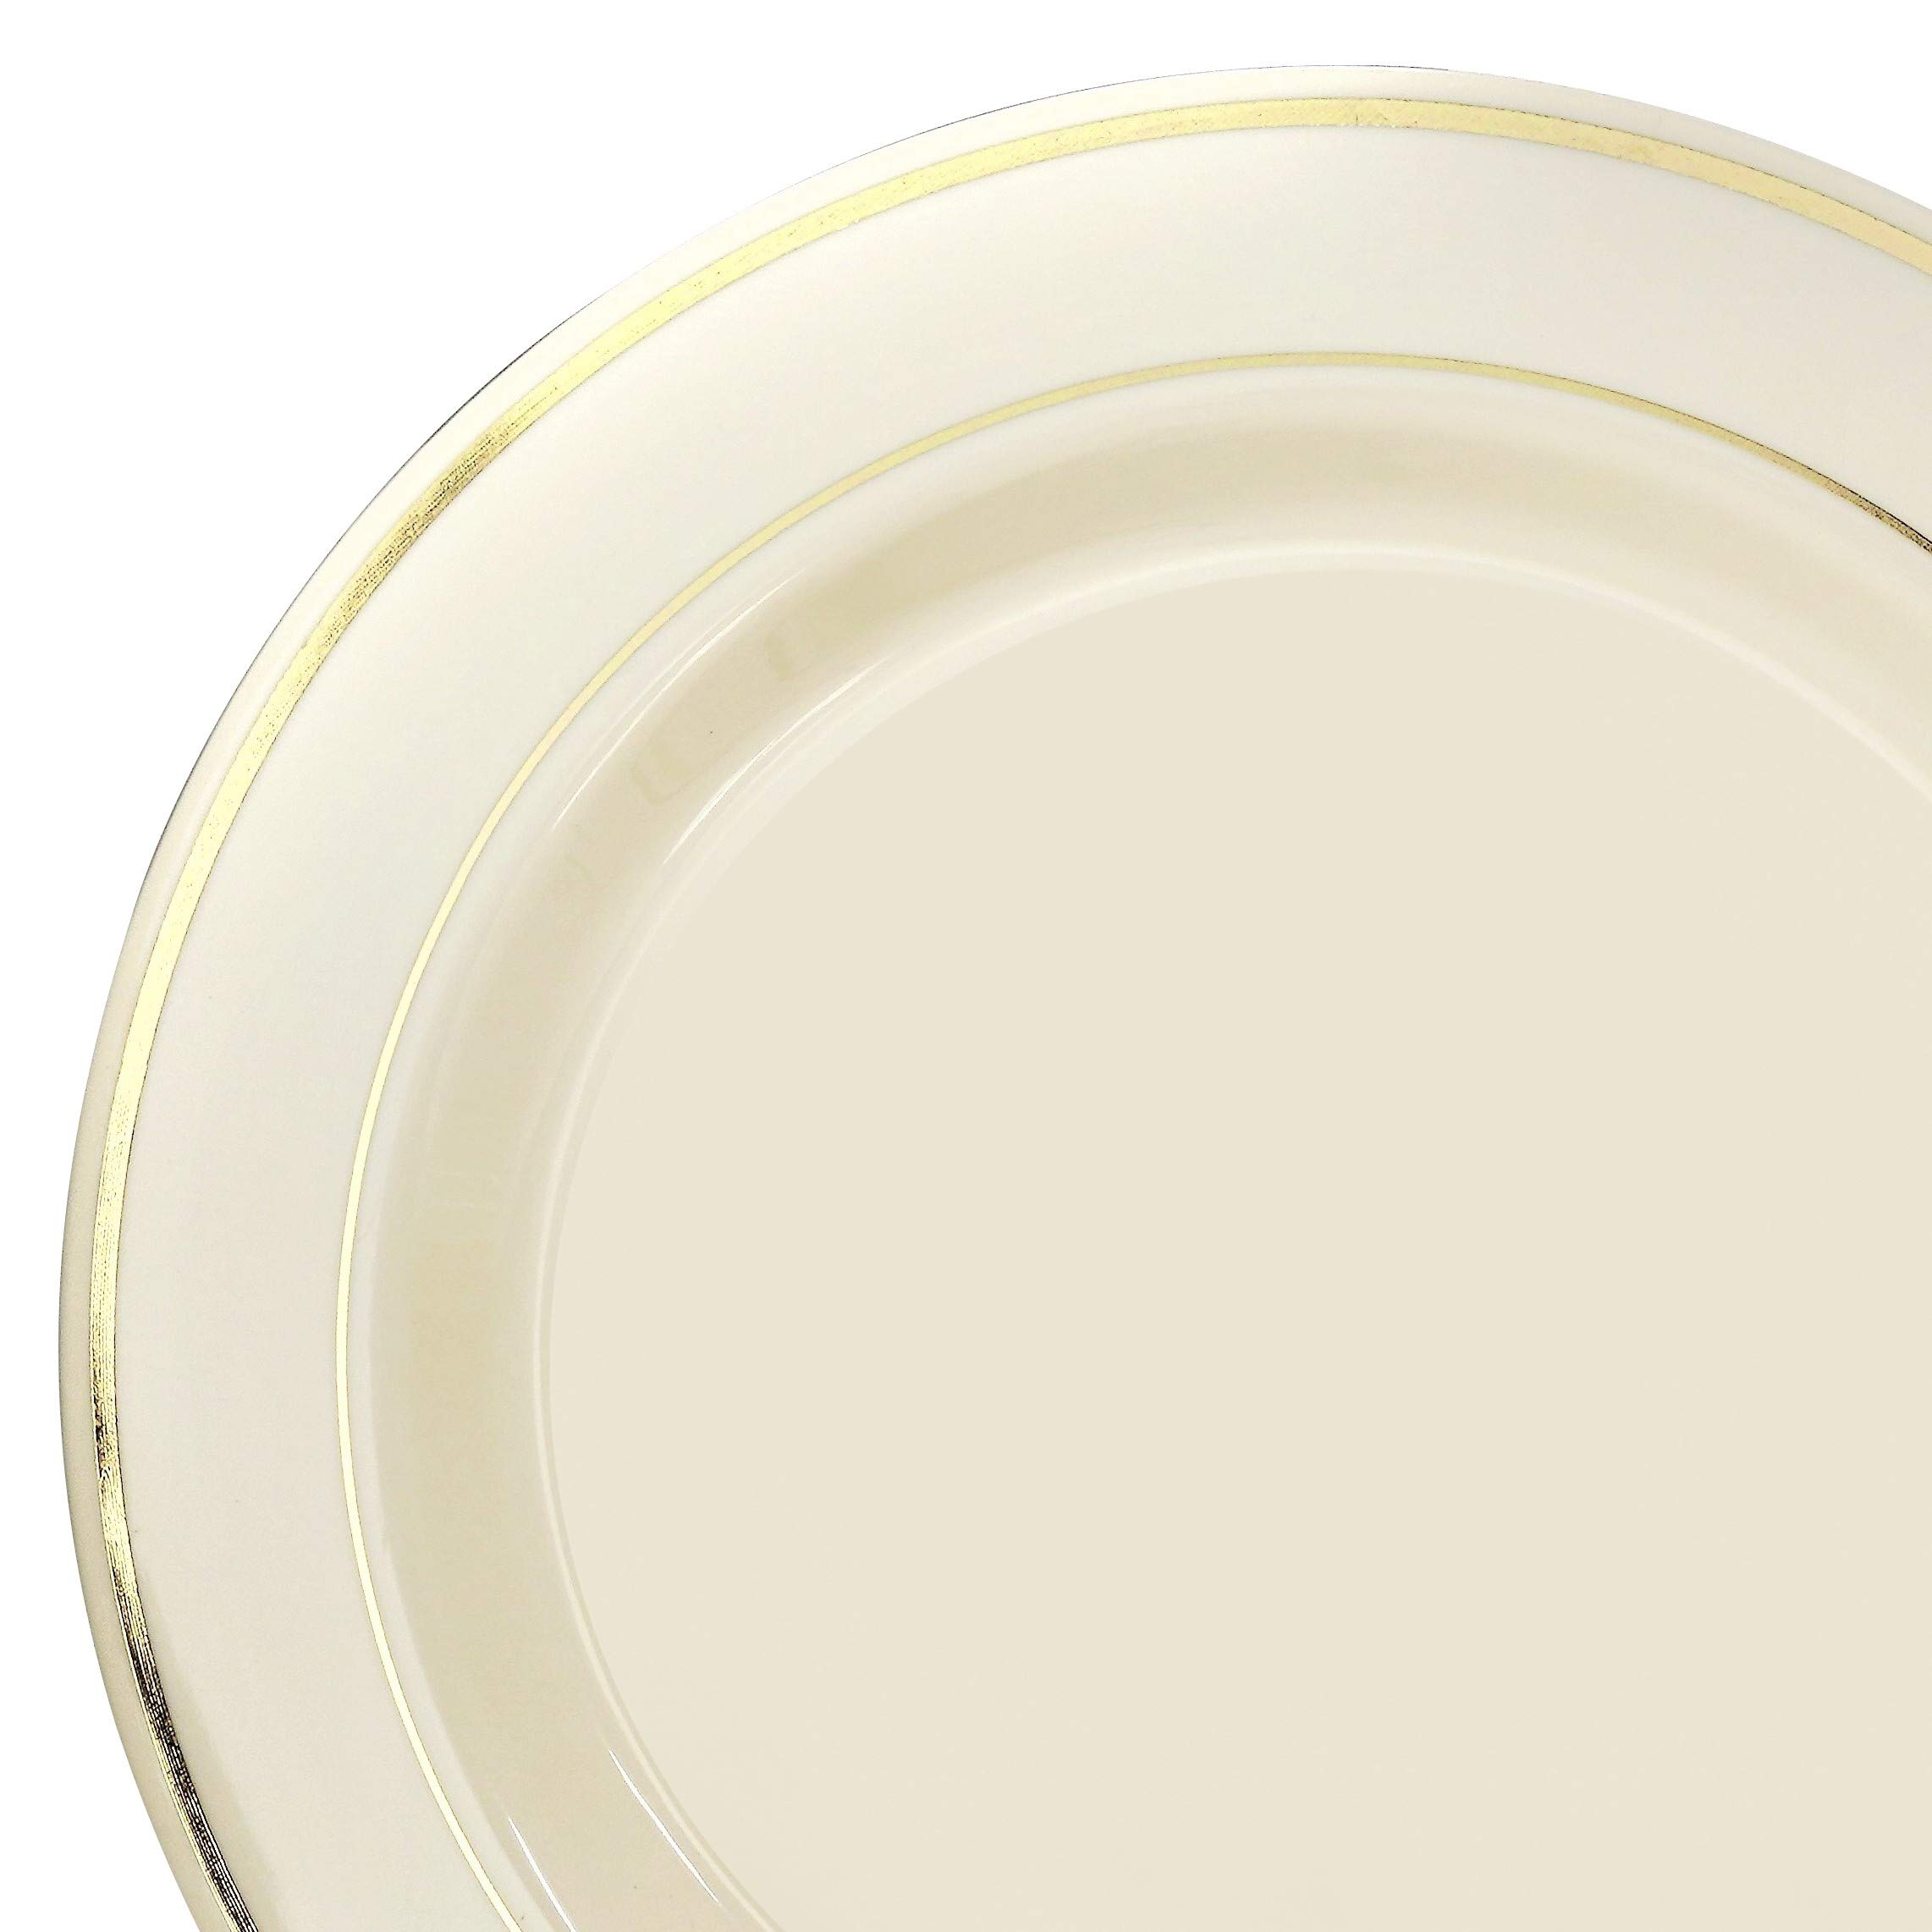 OCCASIONS 120 Plates Pack, Heavyweight Disposable Wedding Party Plastic Plates (10.5'' Dinner Plate, Ivory & Gold Rim)